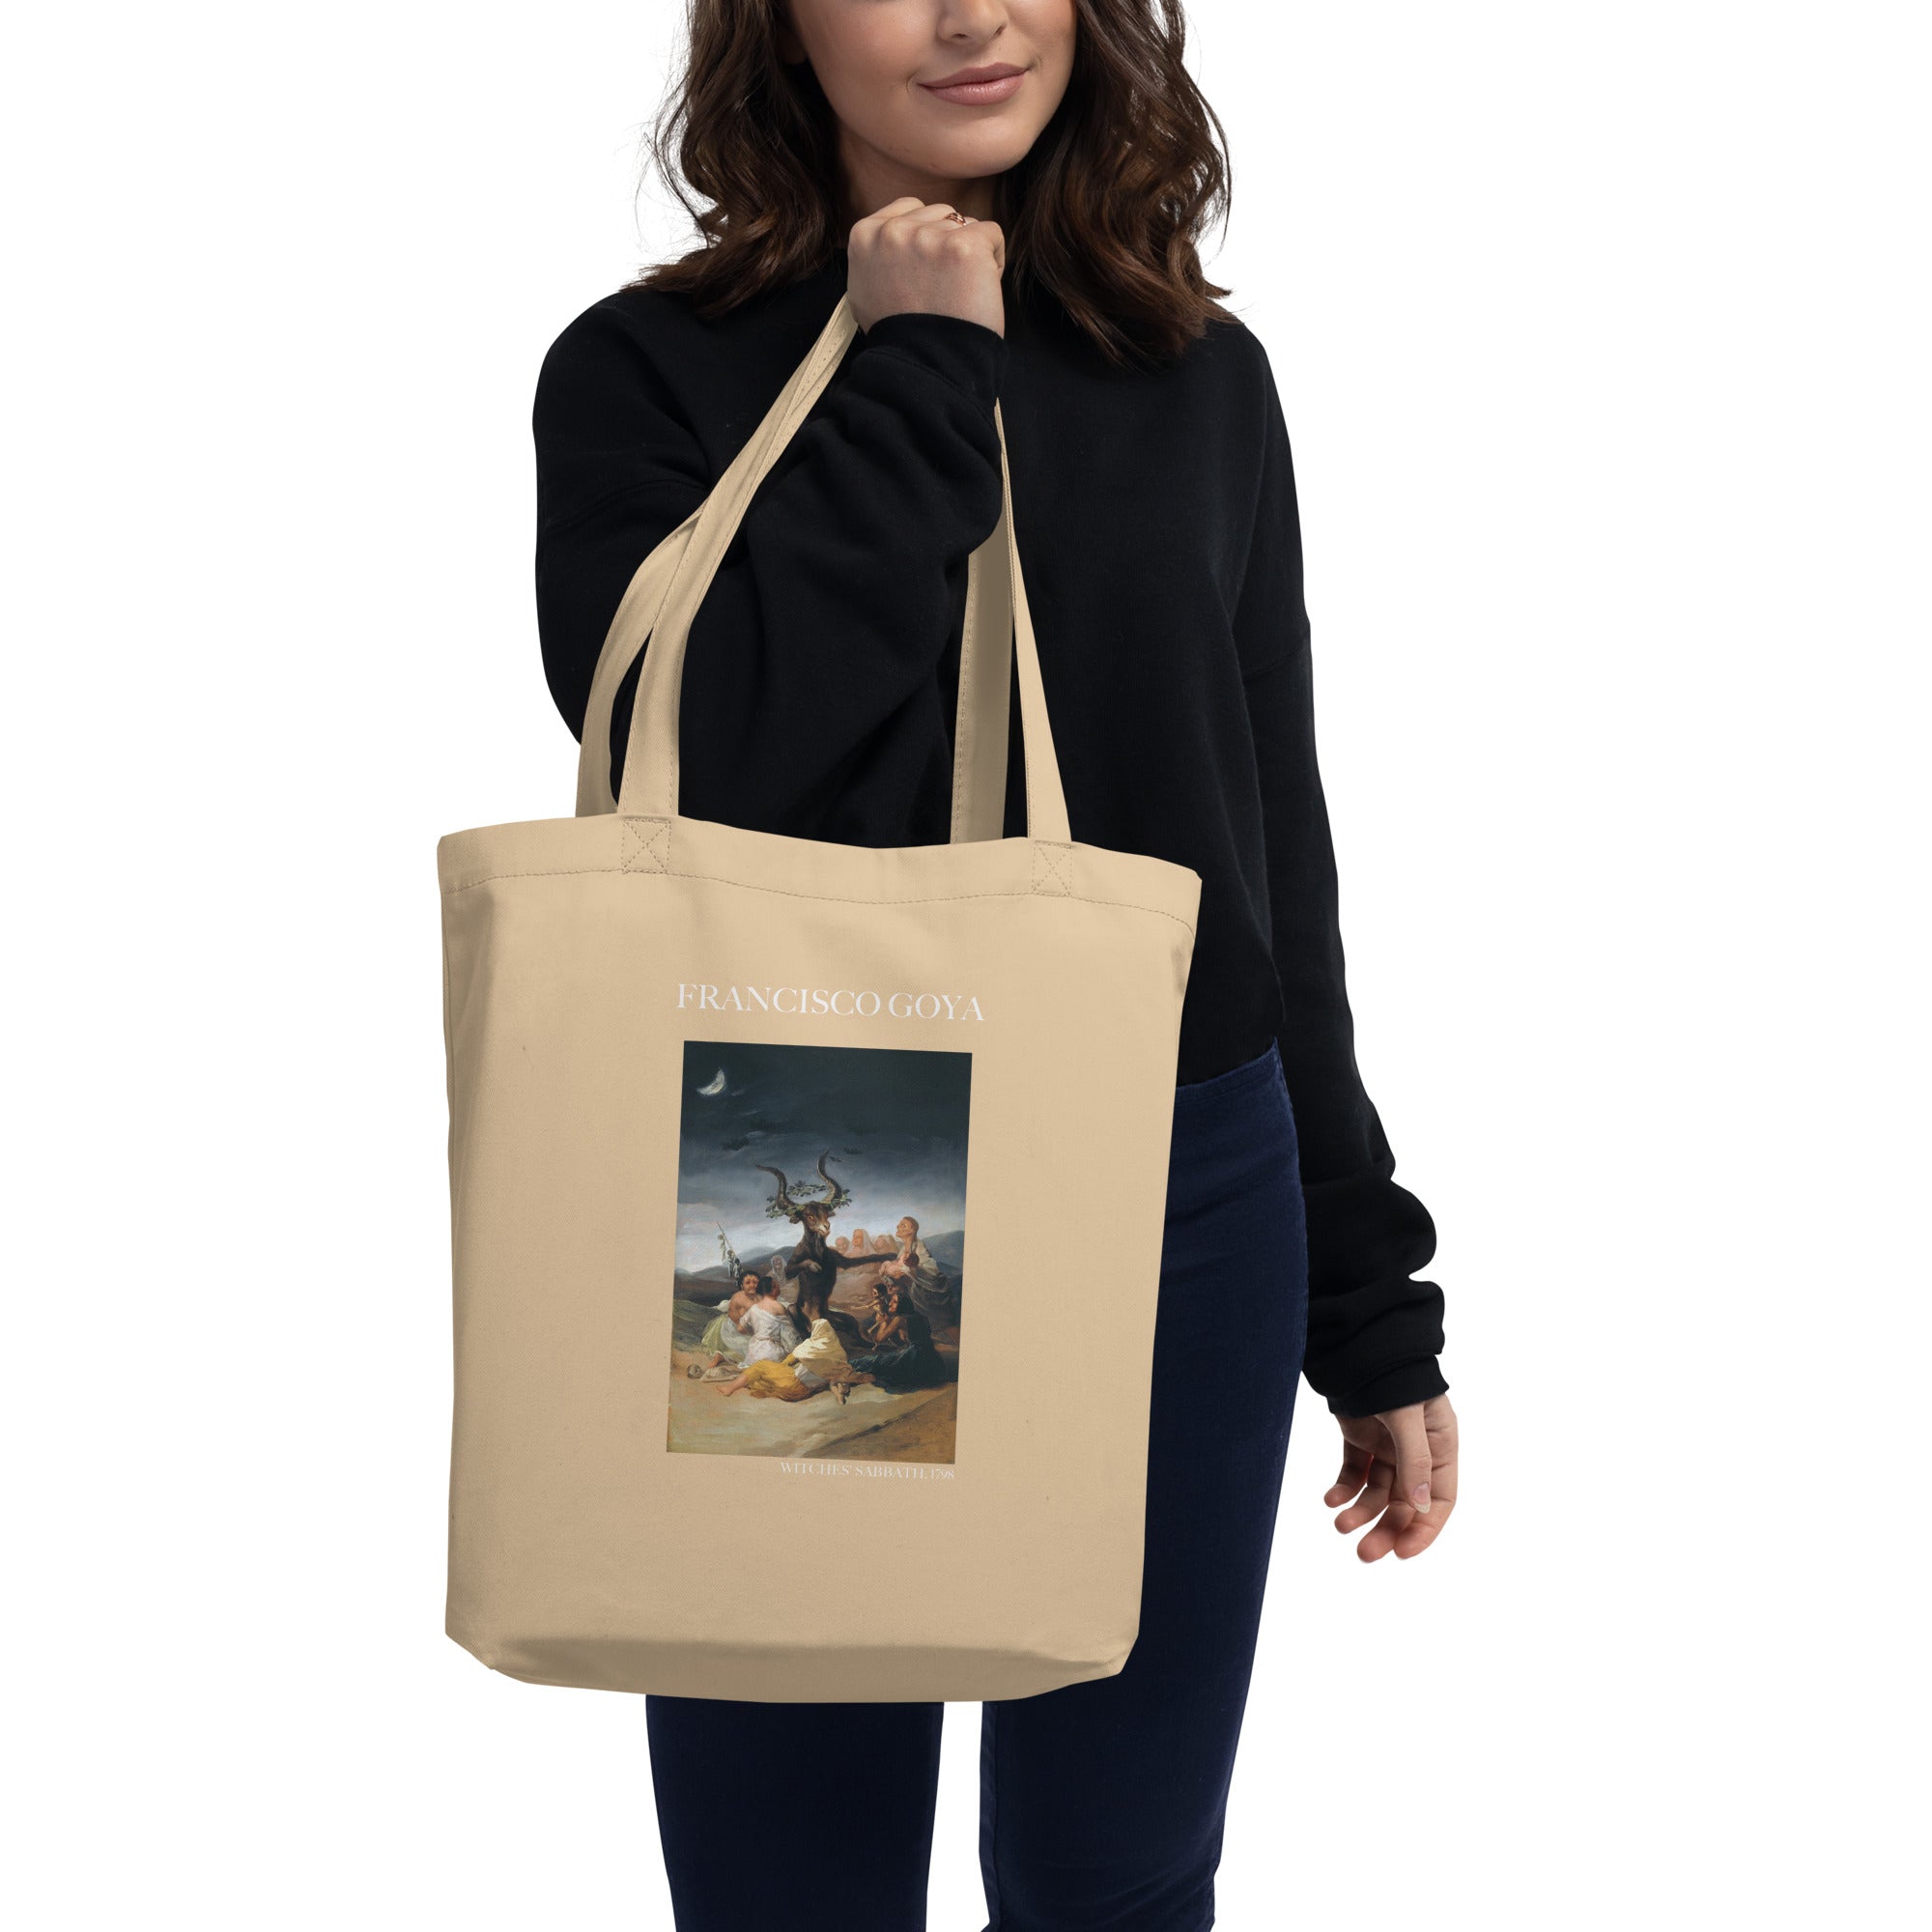 Francisco Goya 'Witches' Sabbath' Famous Painting Totebag | Eco Friendly Art Tote Bag